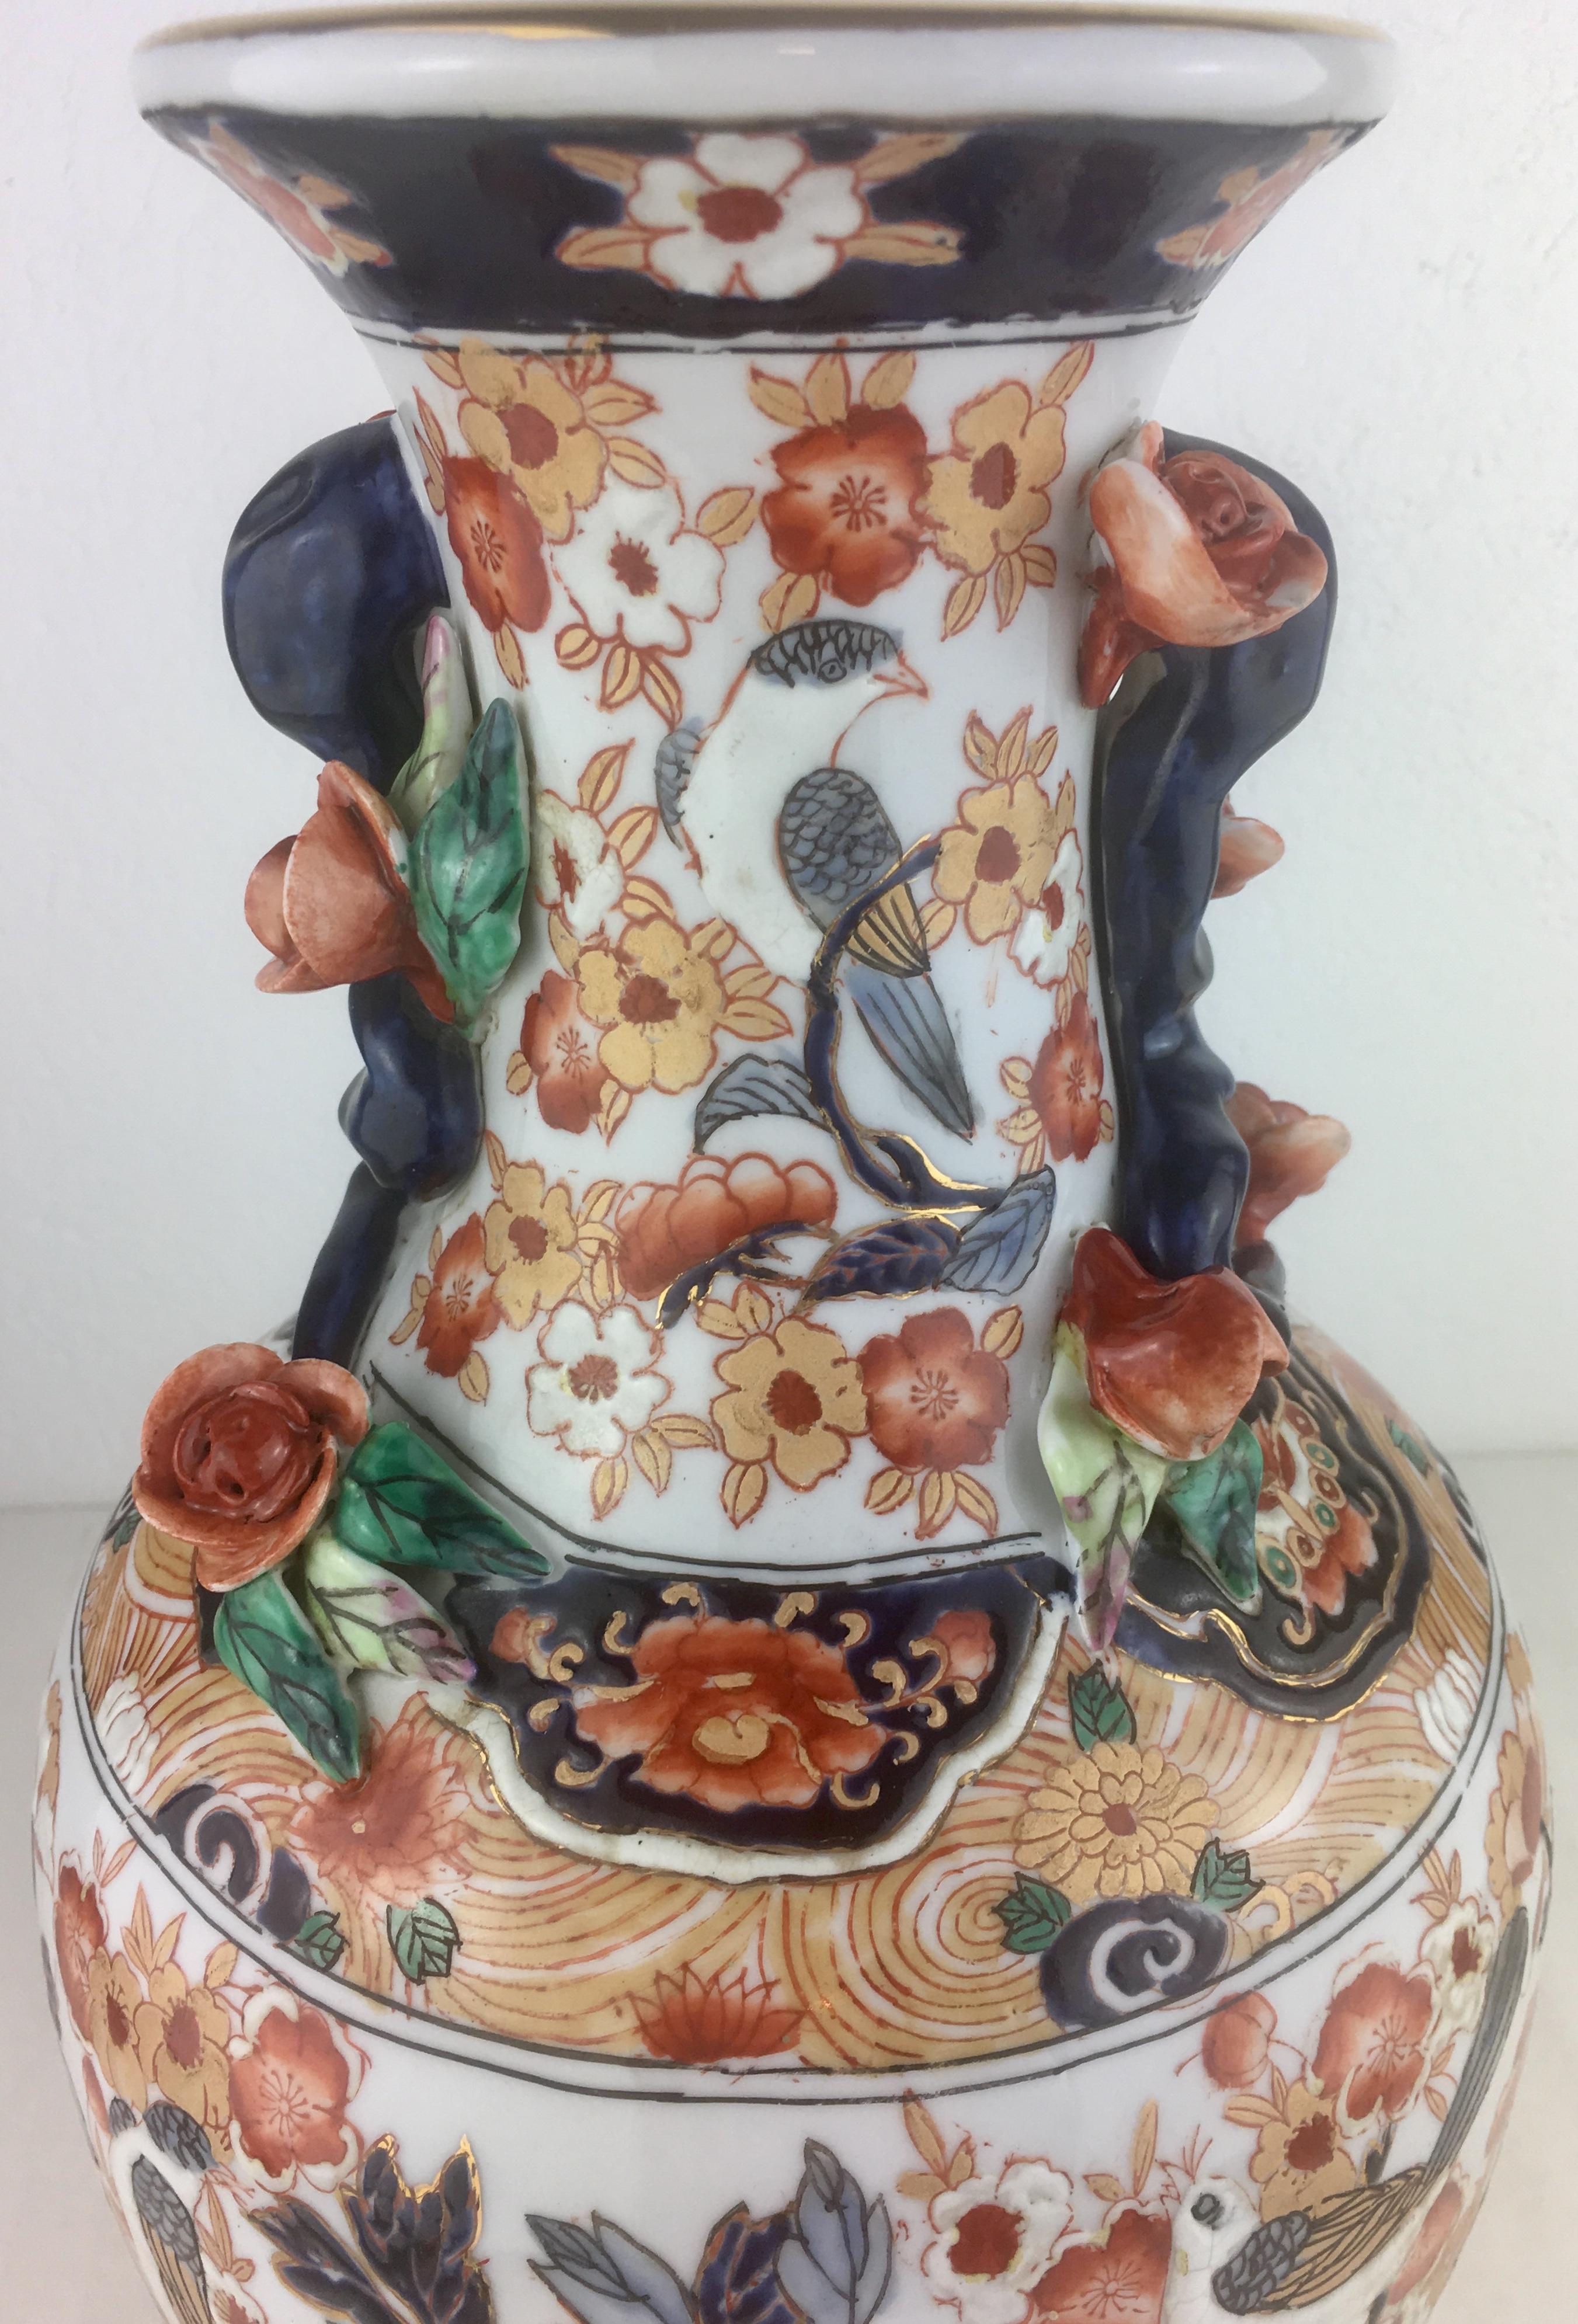 Decorate a mantel or a buffet with this colorful antique Imari vase; hand-crafted in Japan. This elegant 19th century porcelain vase features hand-painted decor of birds, flowers, leaves and butterflies in the blue, green, orange, blue and gold